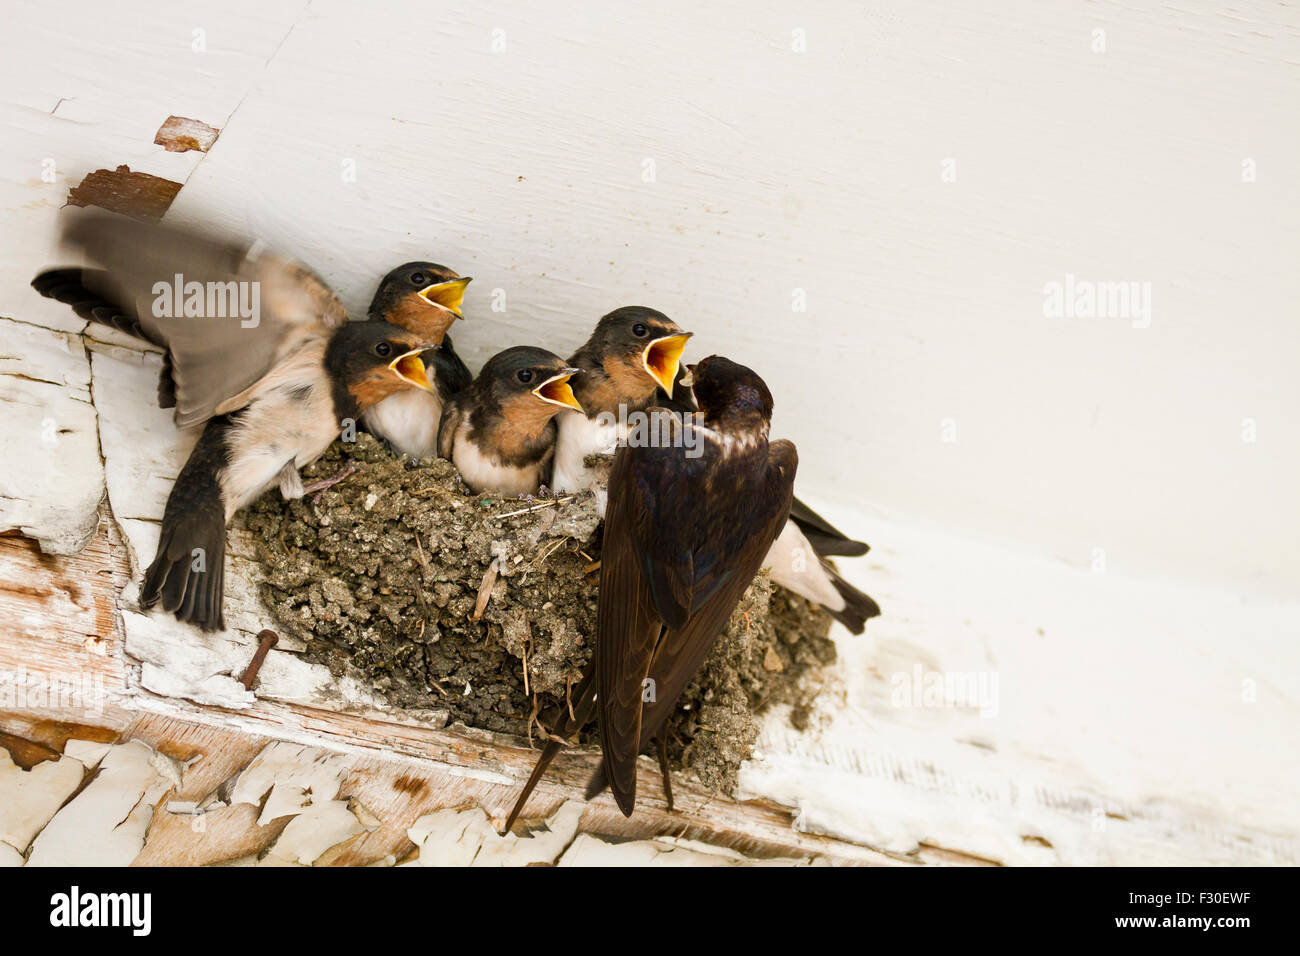 Feed me! Demanding swallow chicks begging for food Stock Photo